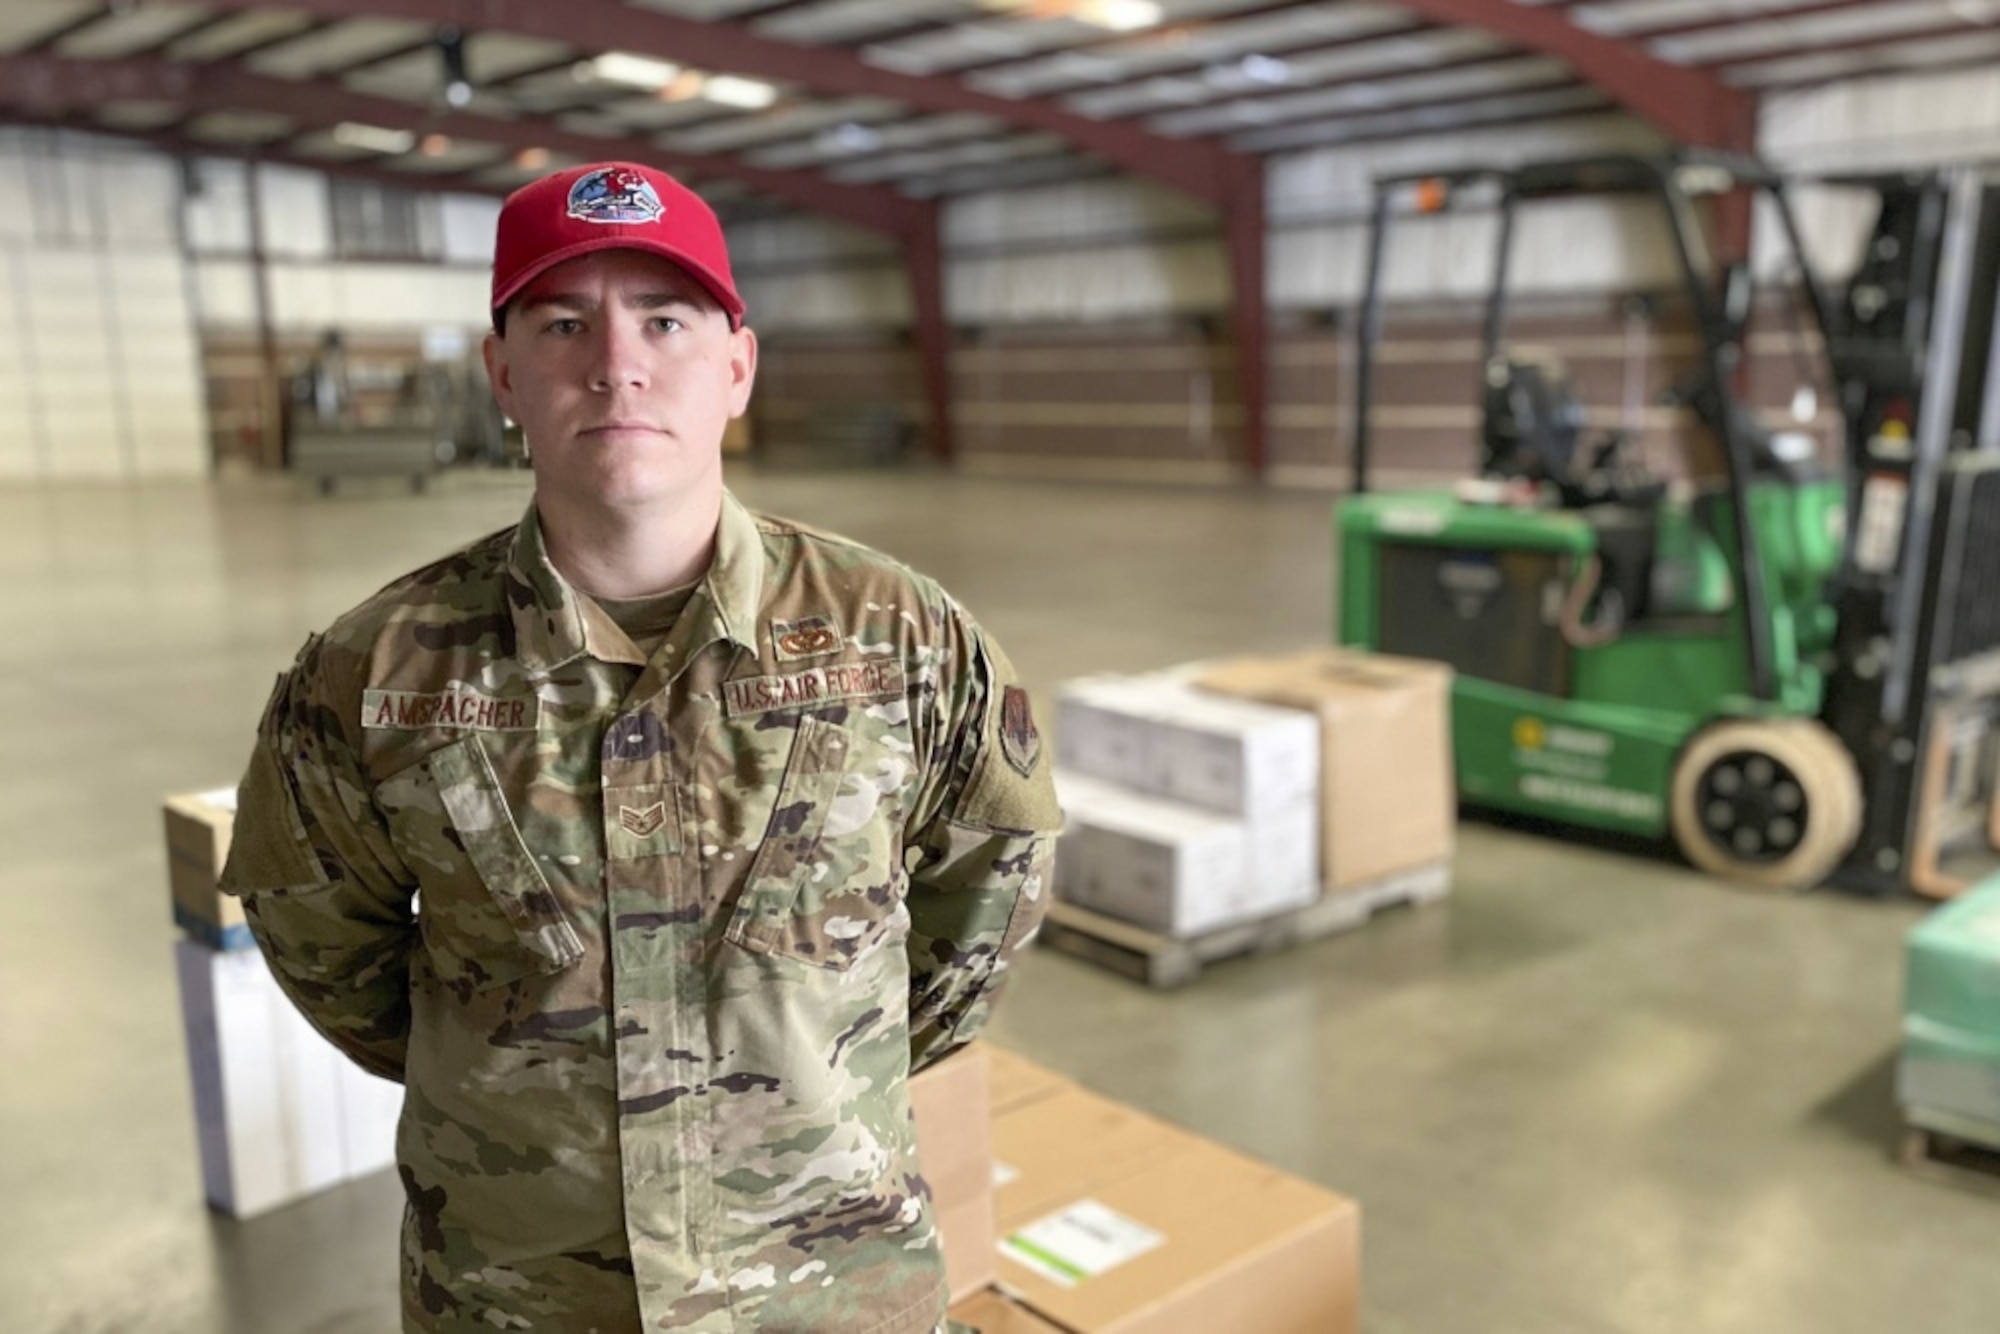 An Airmen wearing a red hat stands at parade rest in a warehouse